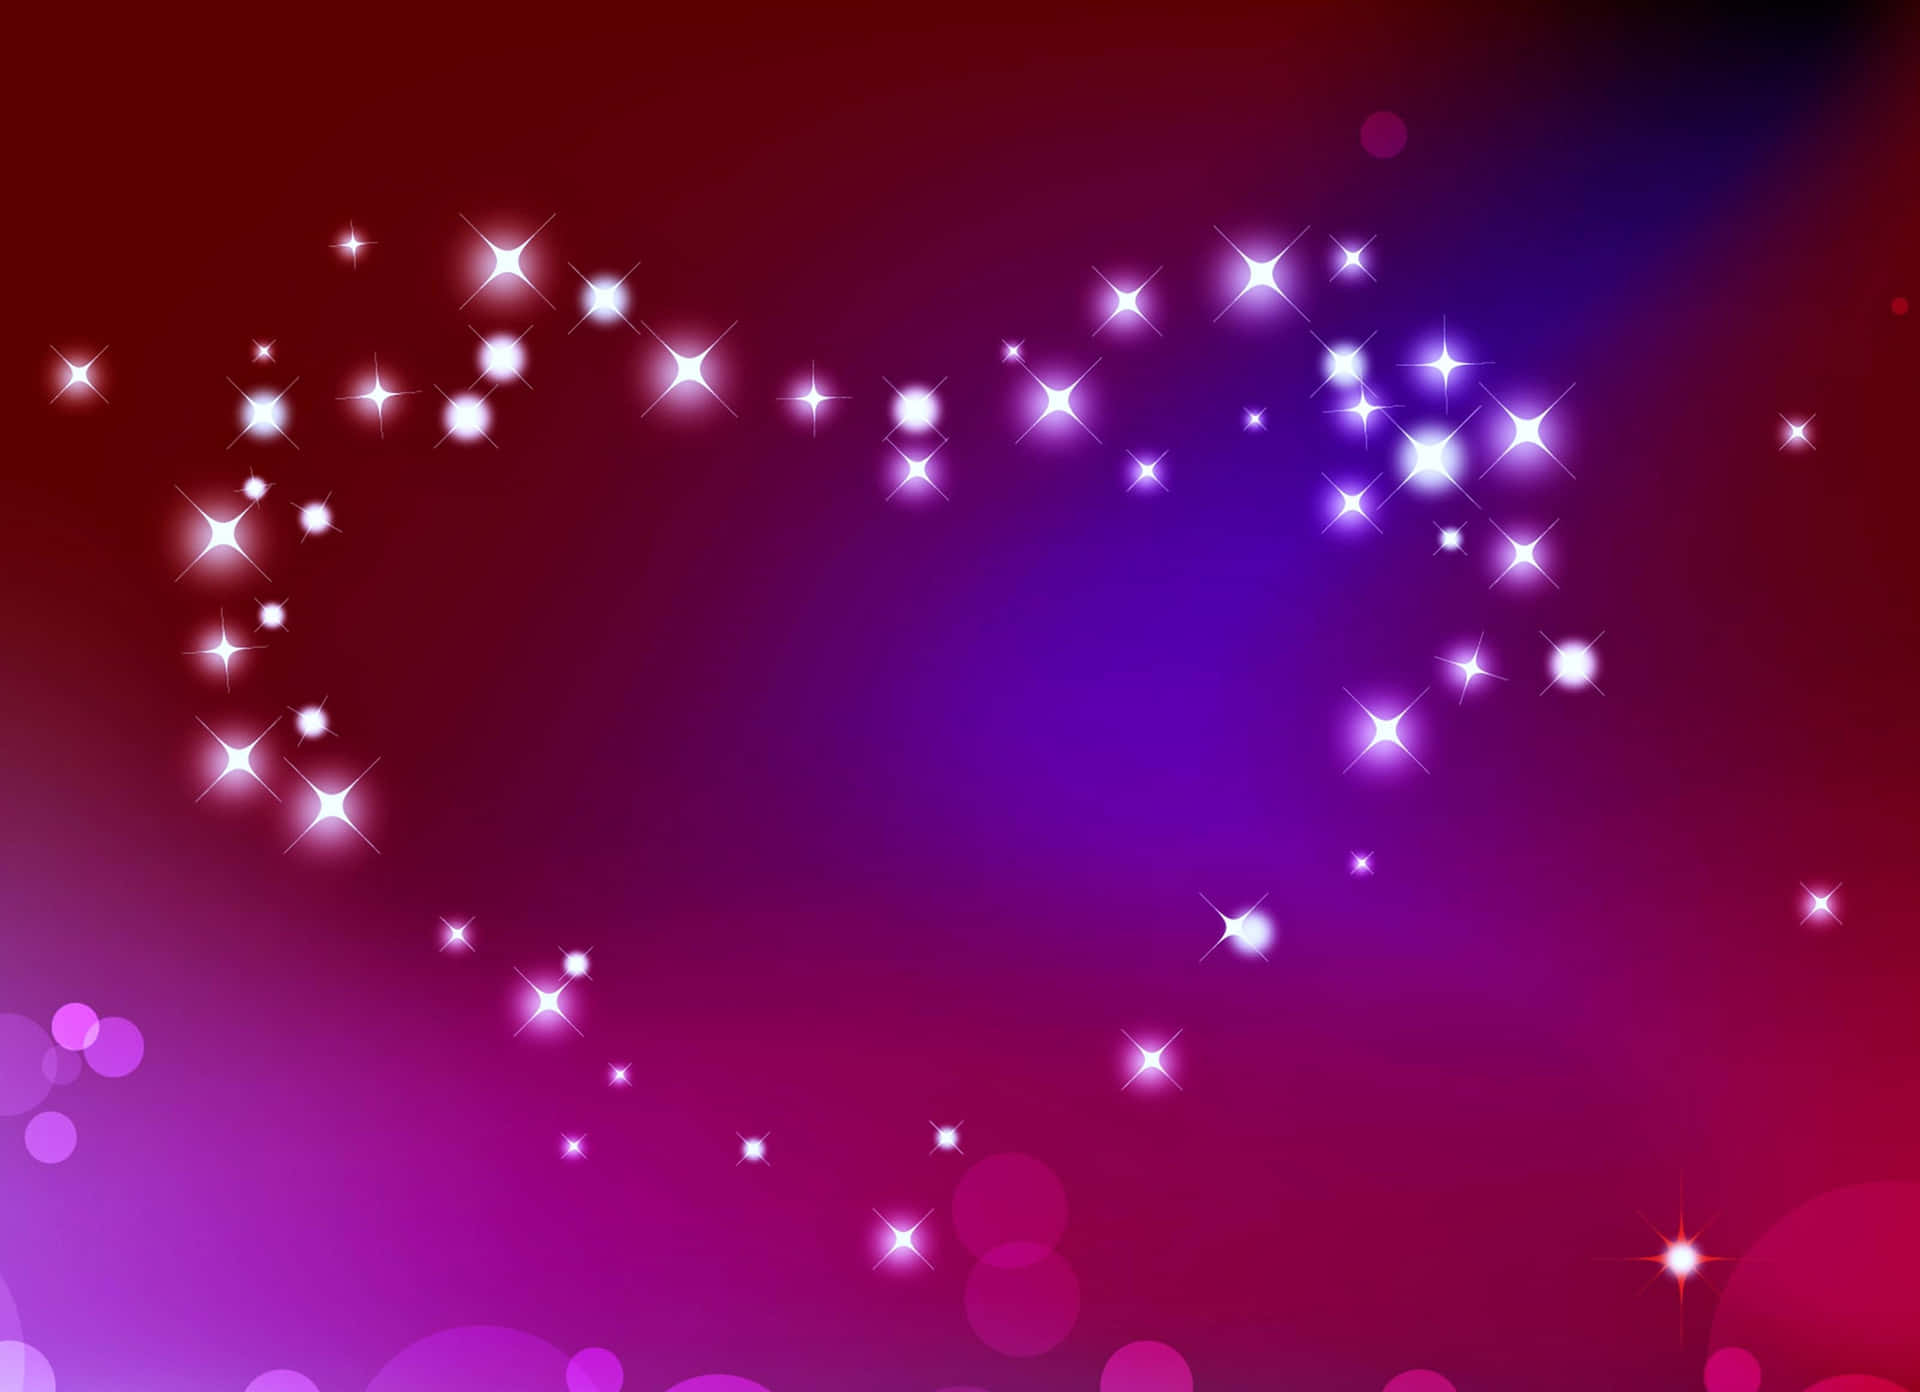 Spread the Love with Glitter Pink Hearts Wallpaper